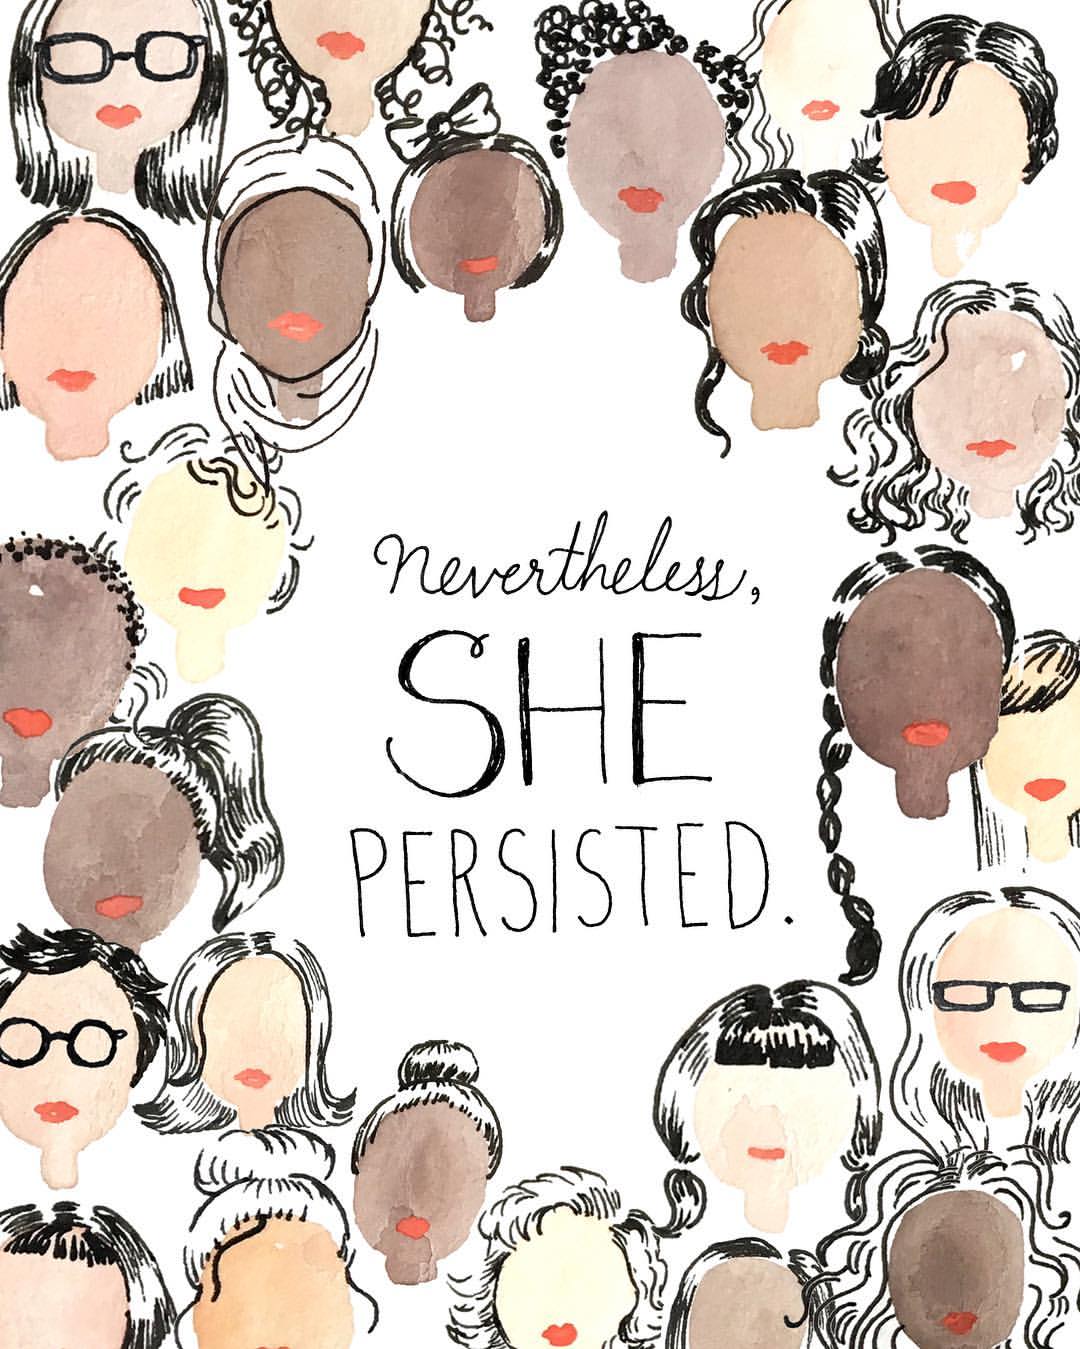 She was warned. Nevertheless, she persisted. Onwards, always